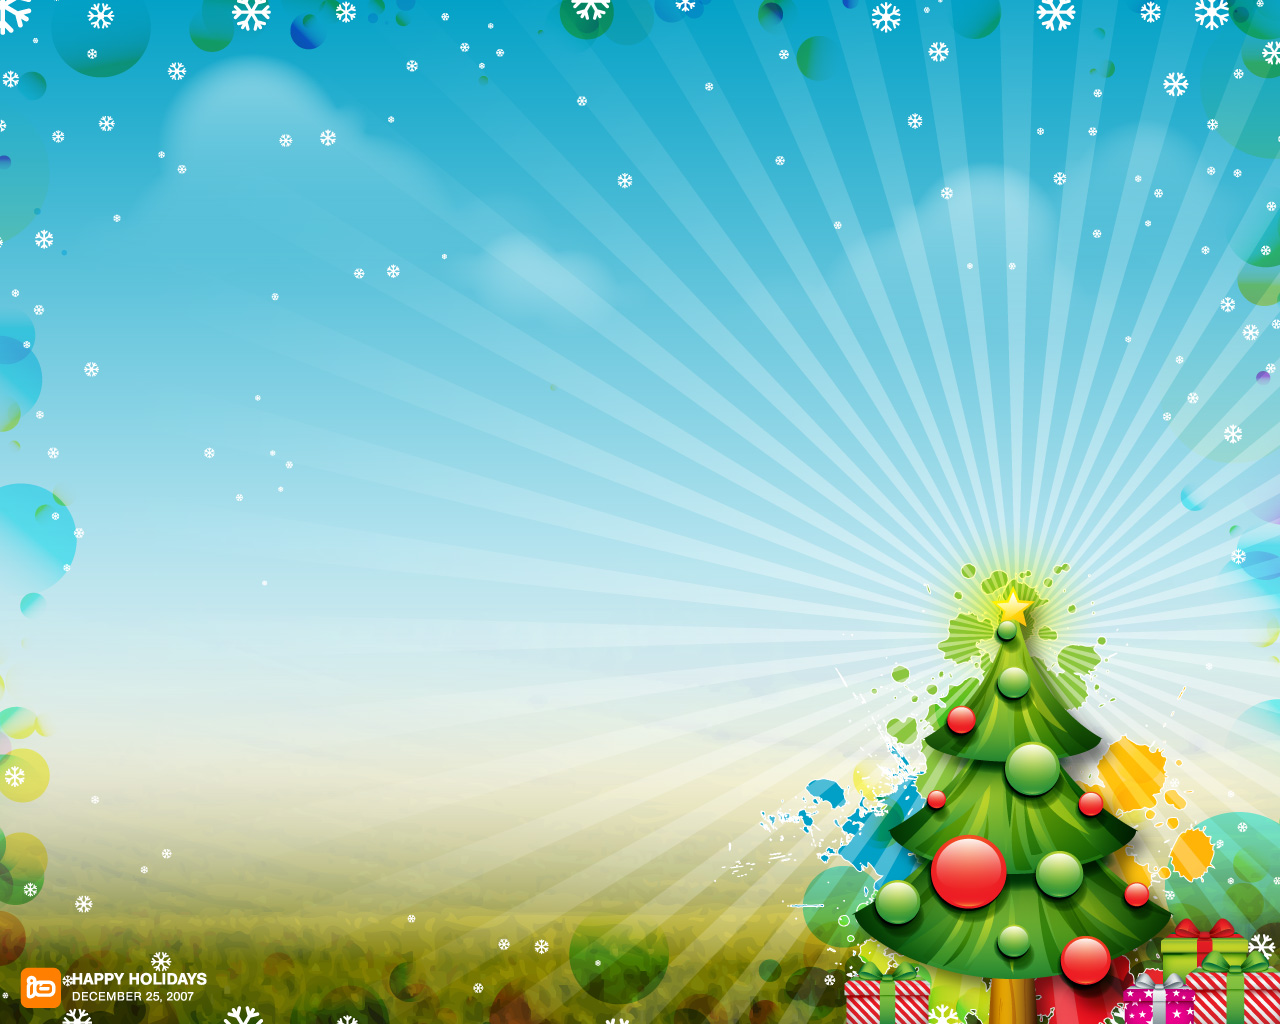 Hand Picked Christmas HD Wallpaper Desktop Background Collection